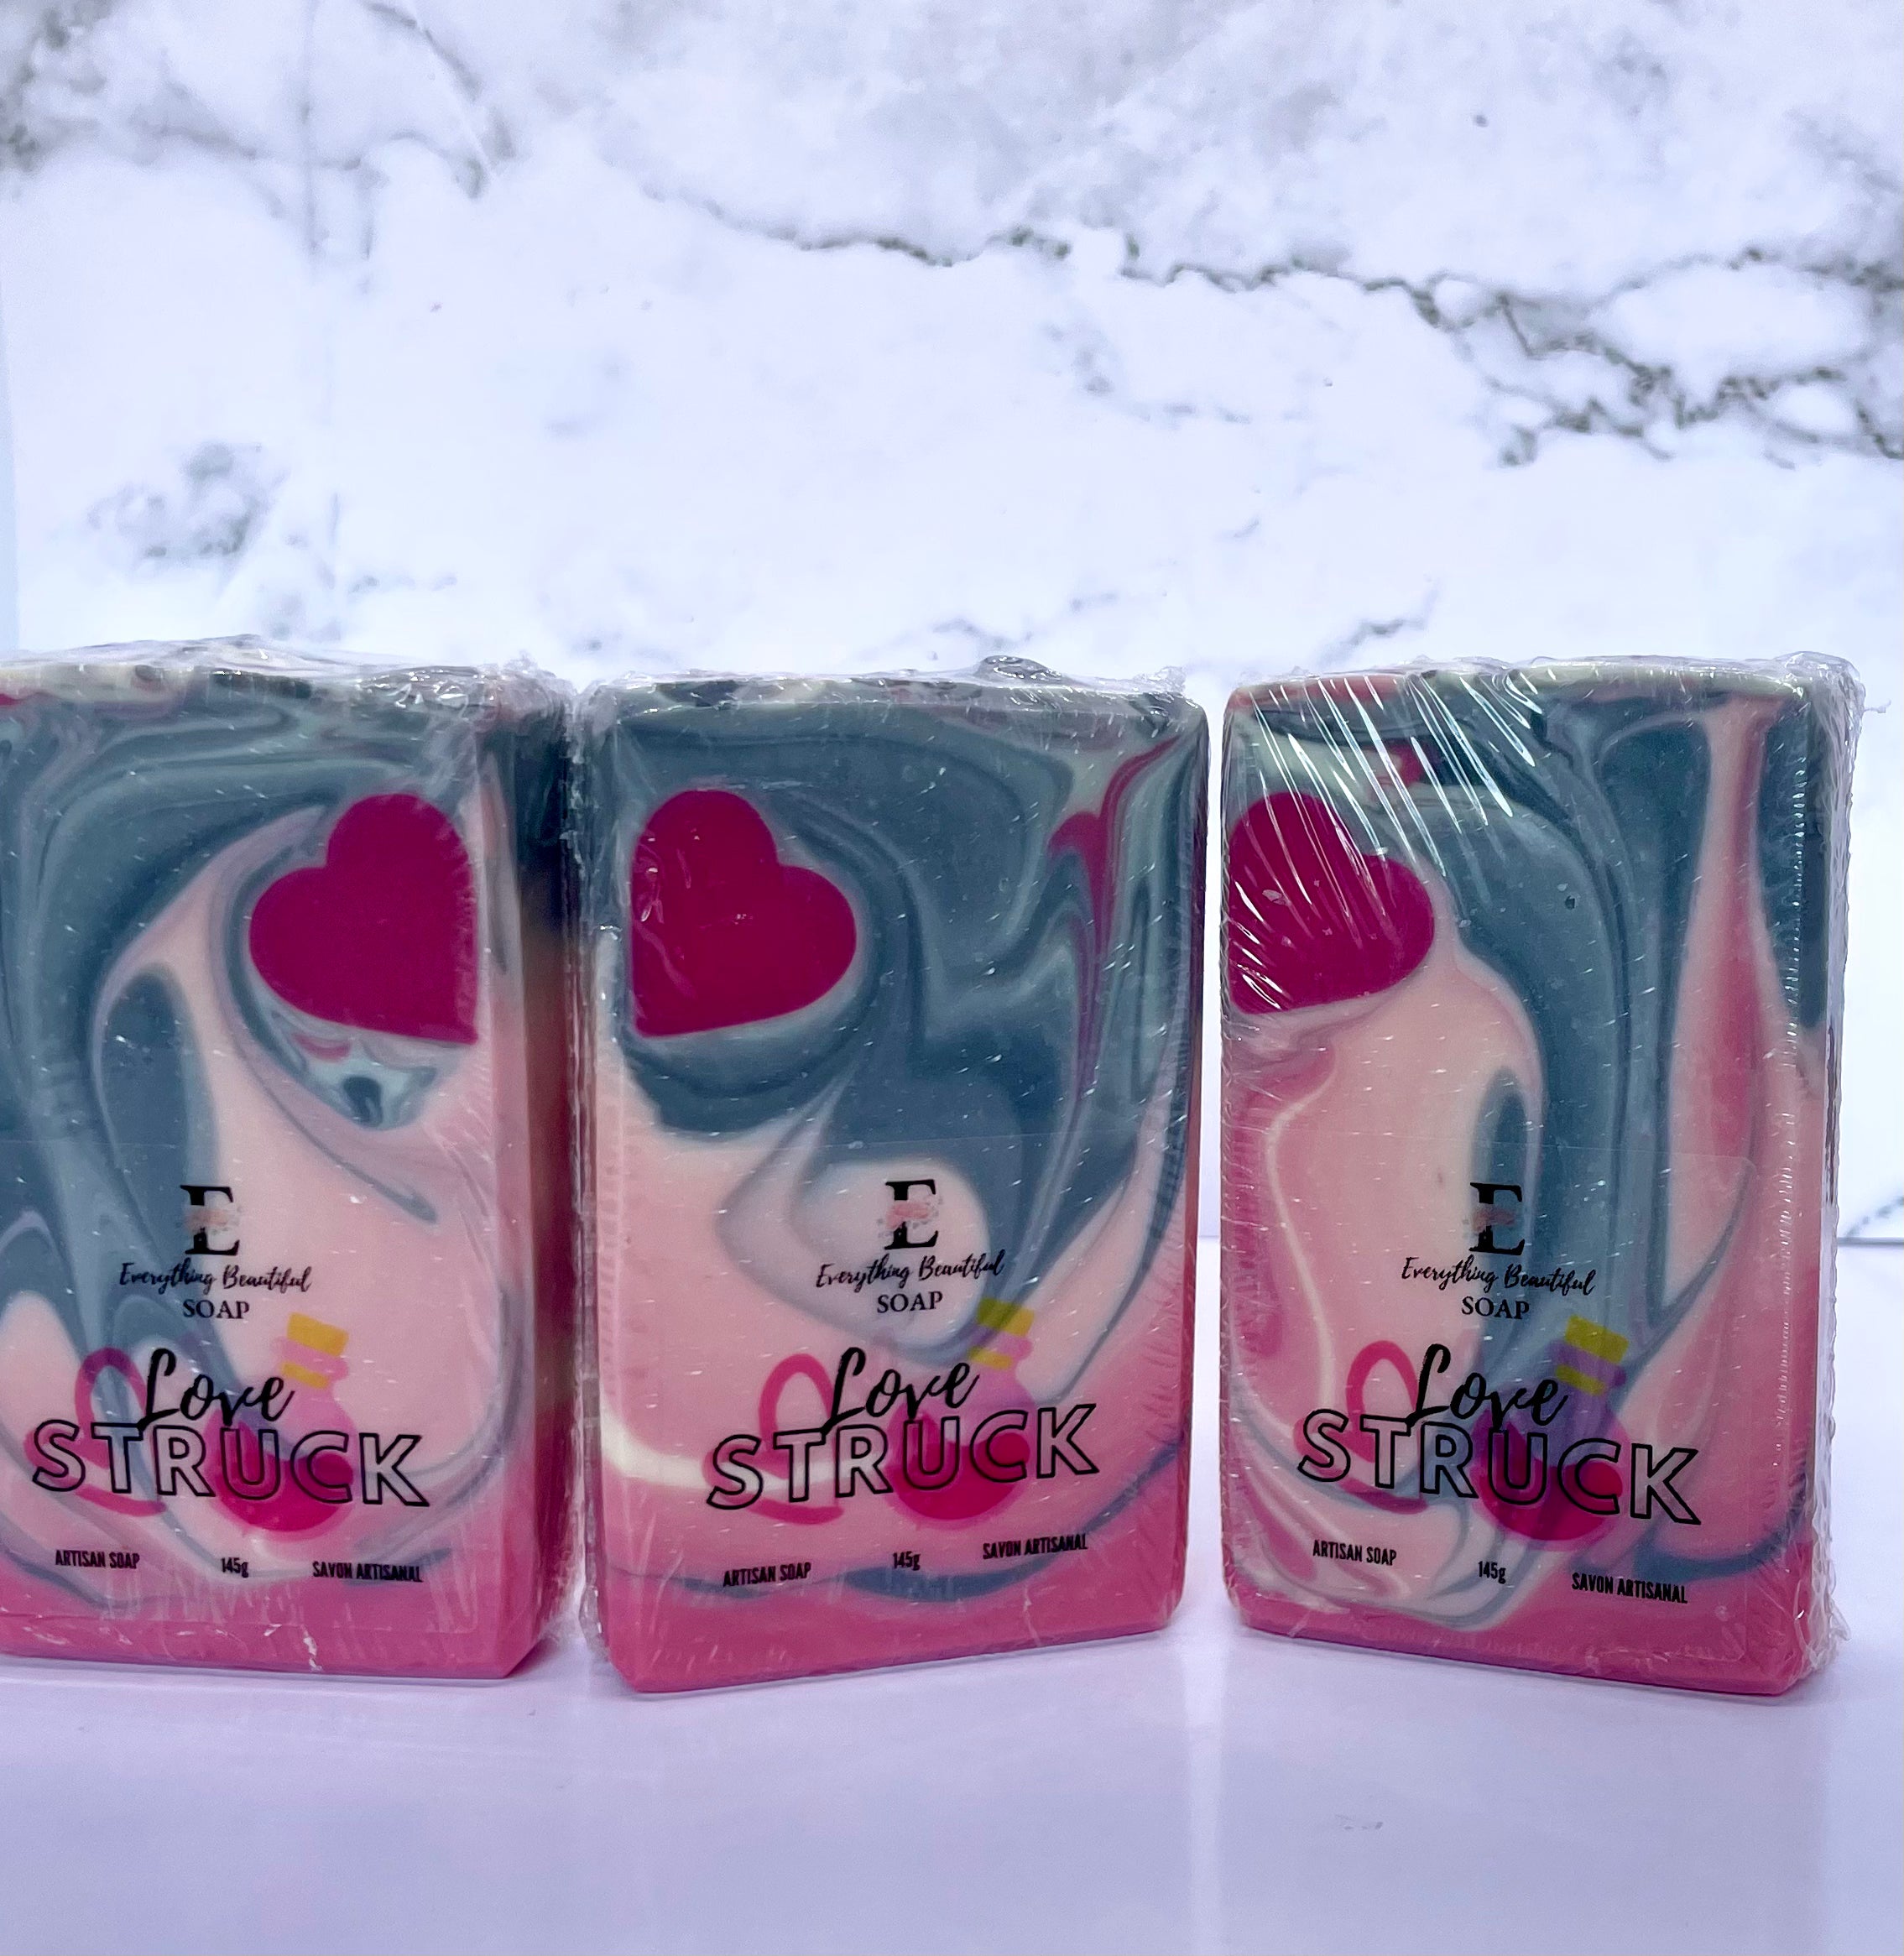 Love Spell dupe handmade soap – Wicked Bubbles